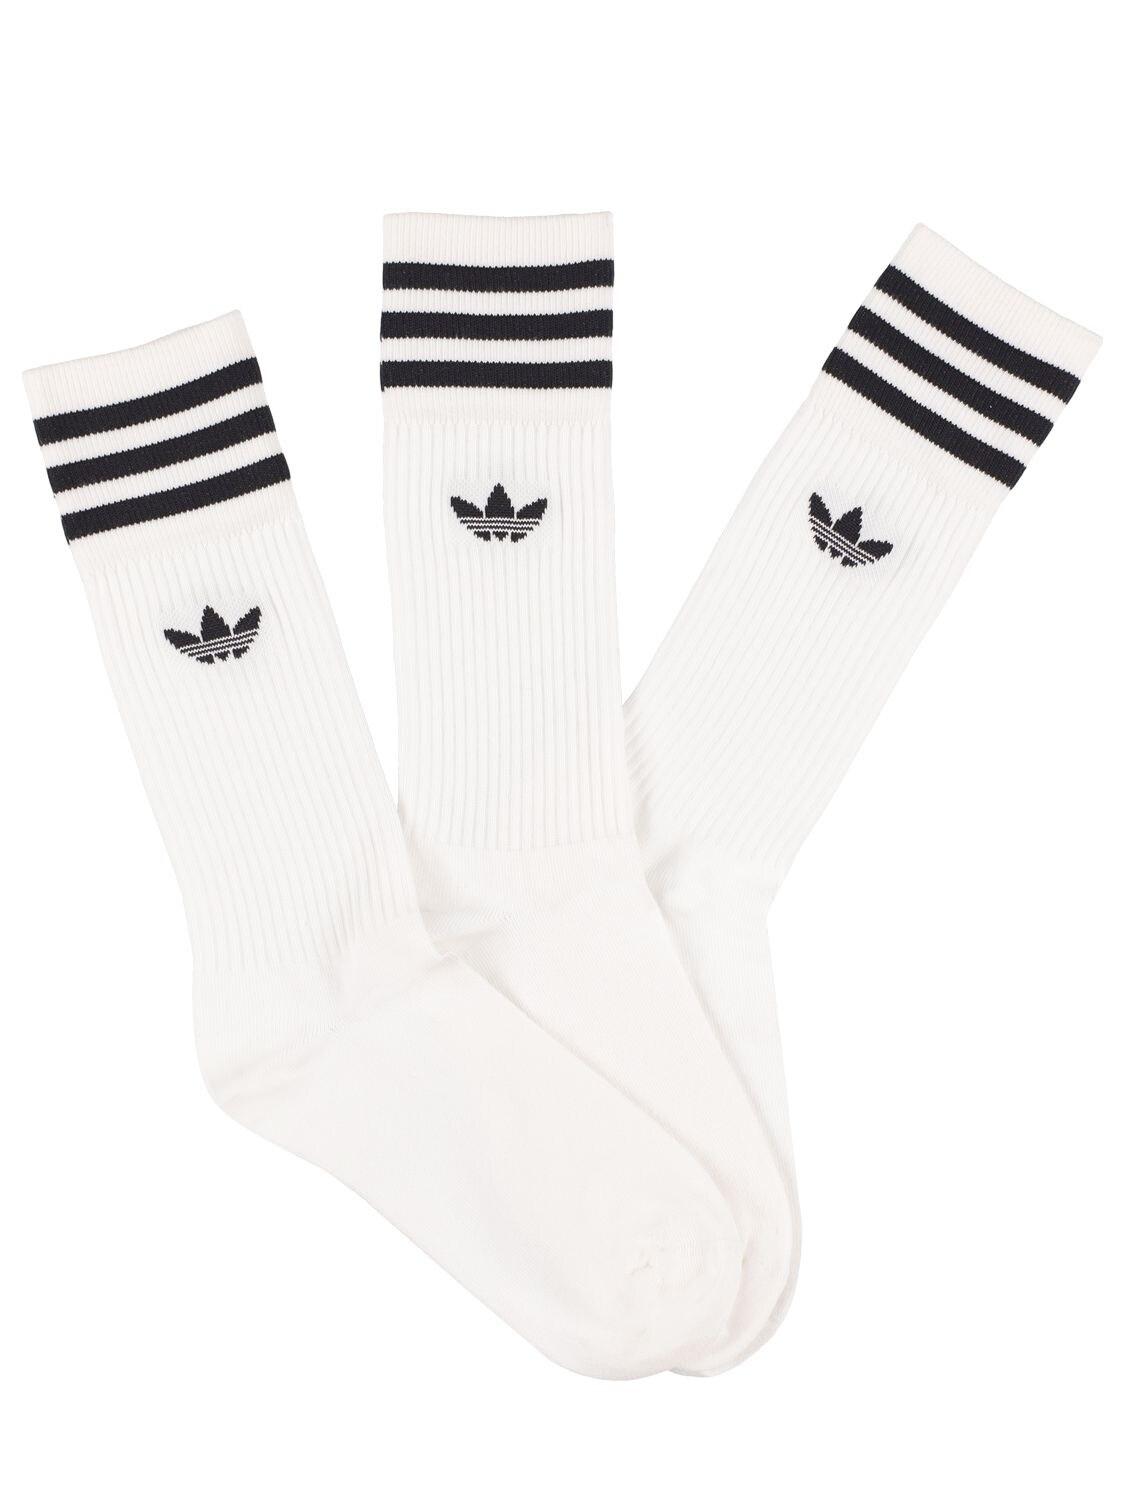 adidas Originals Pack Of 3 Solid Crew Cotton Blend Socks in White | Lyst